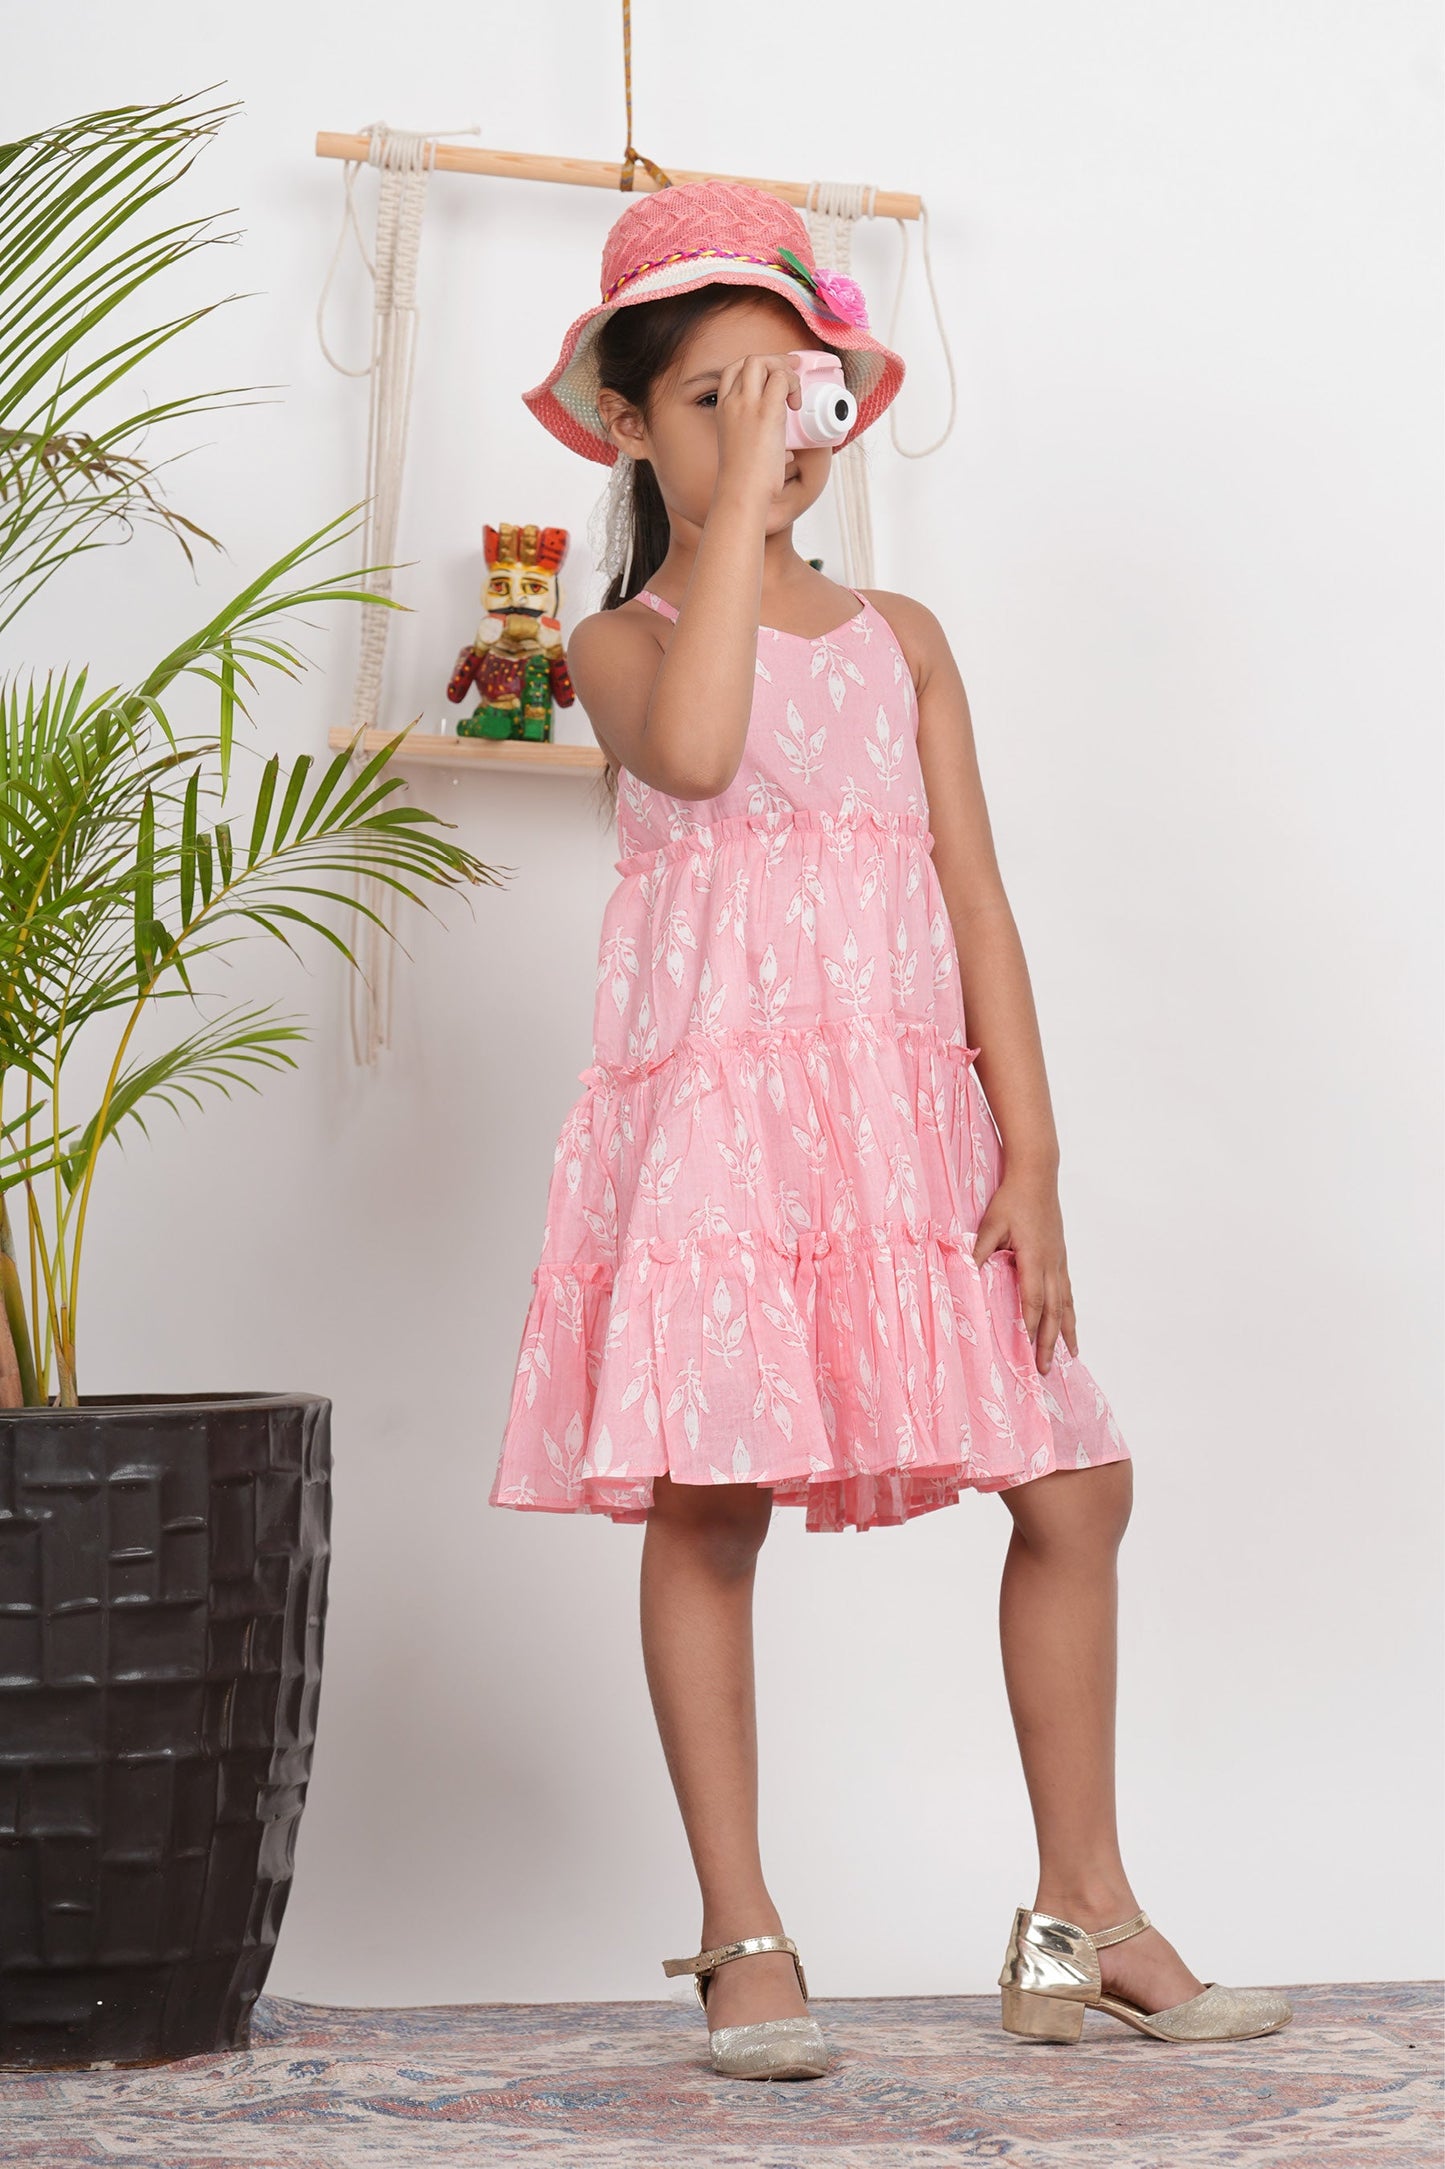 Anna Dress - Pink And White Cotton Block Printed Cotton Baby Girl Dress